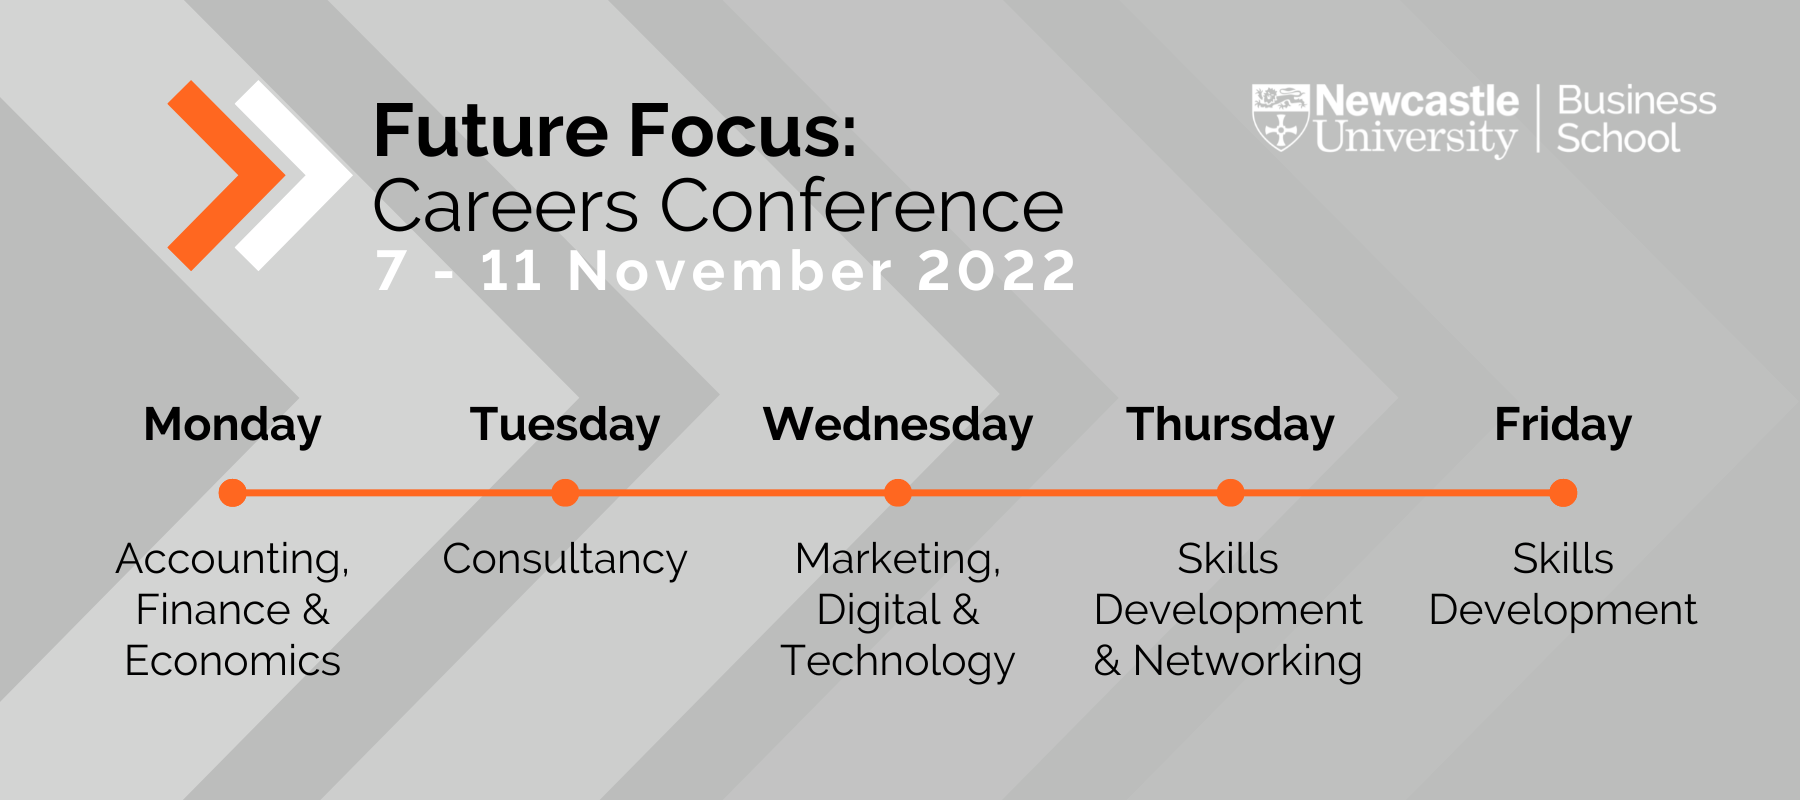 Schedule of Weekly Careers Conference November 2022